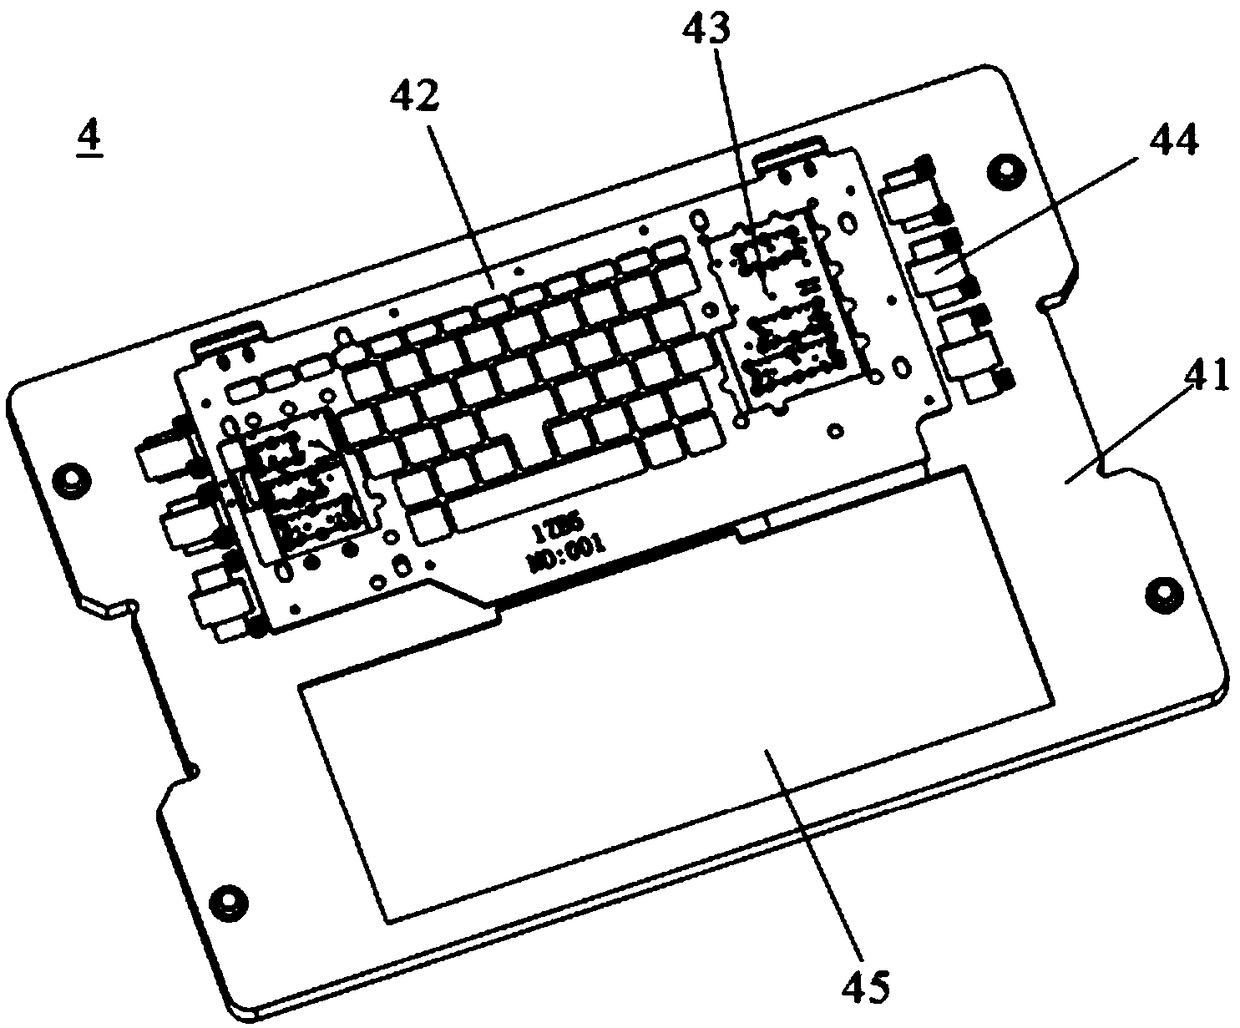 A tooling structure for keyboard assembly